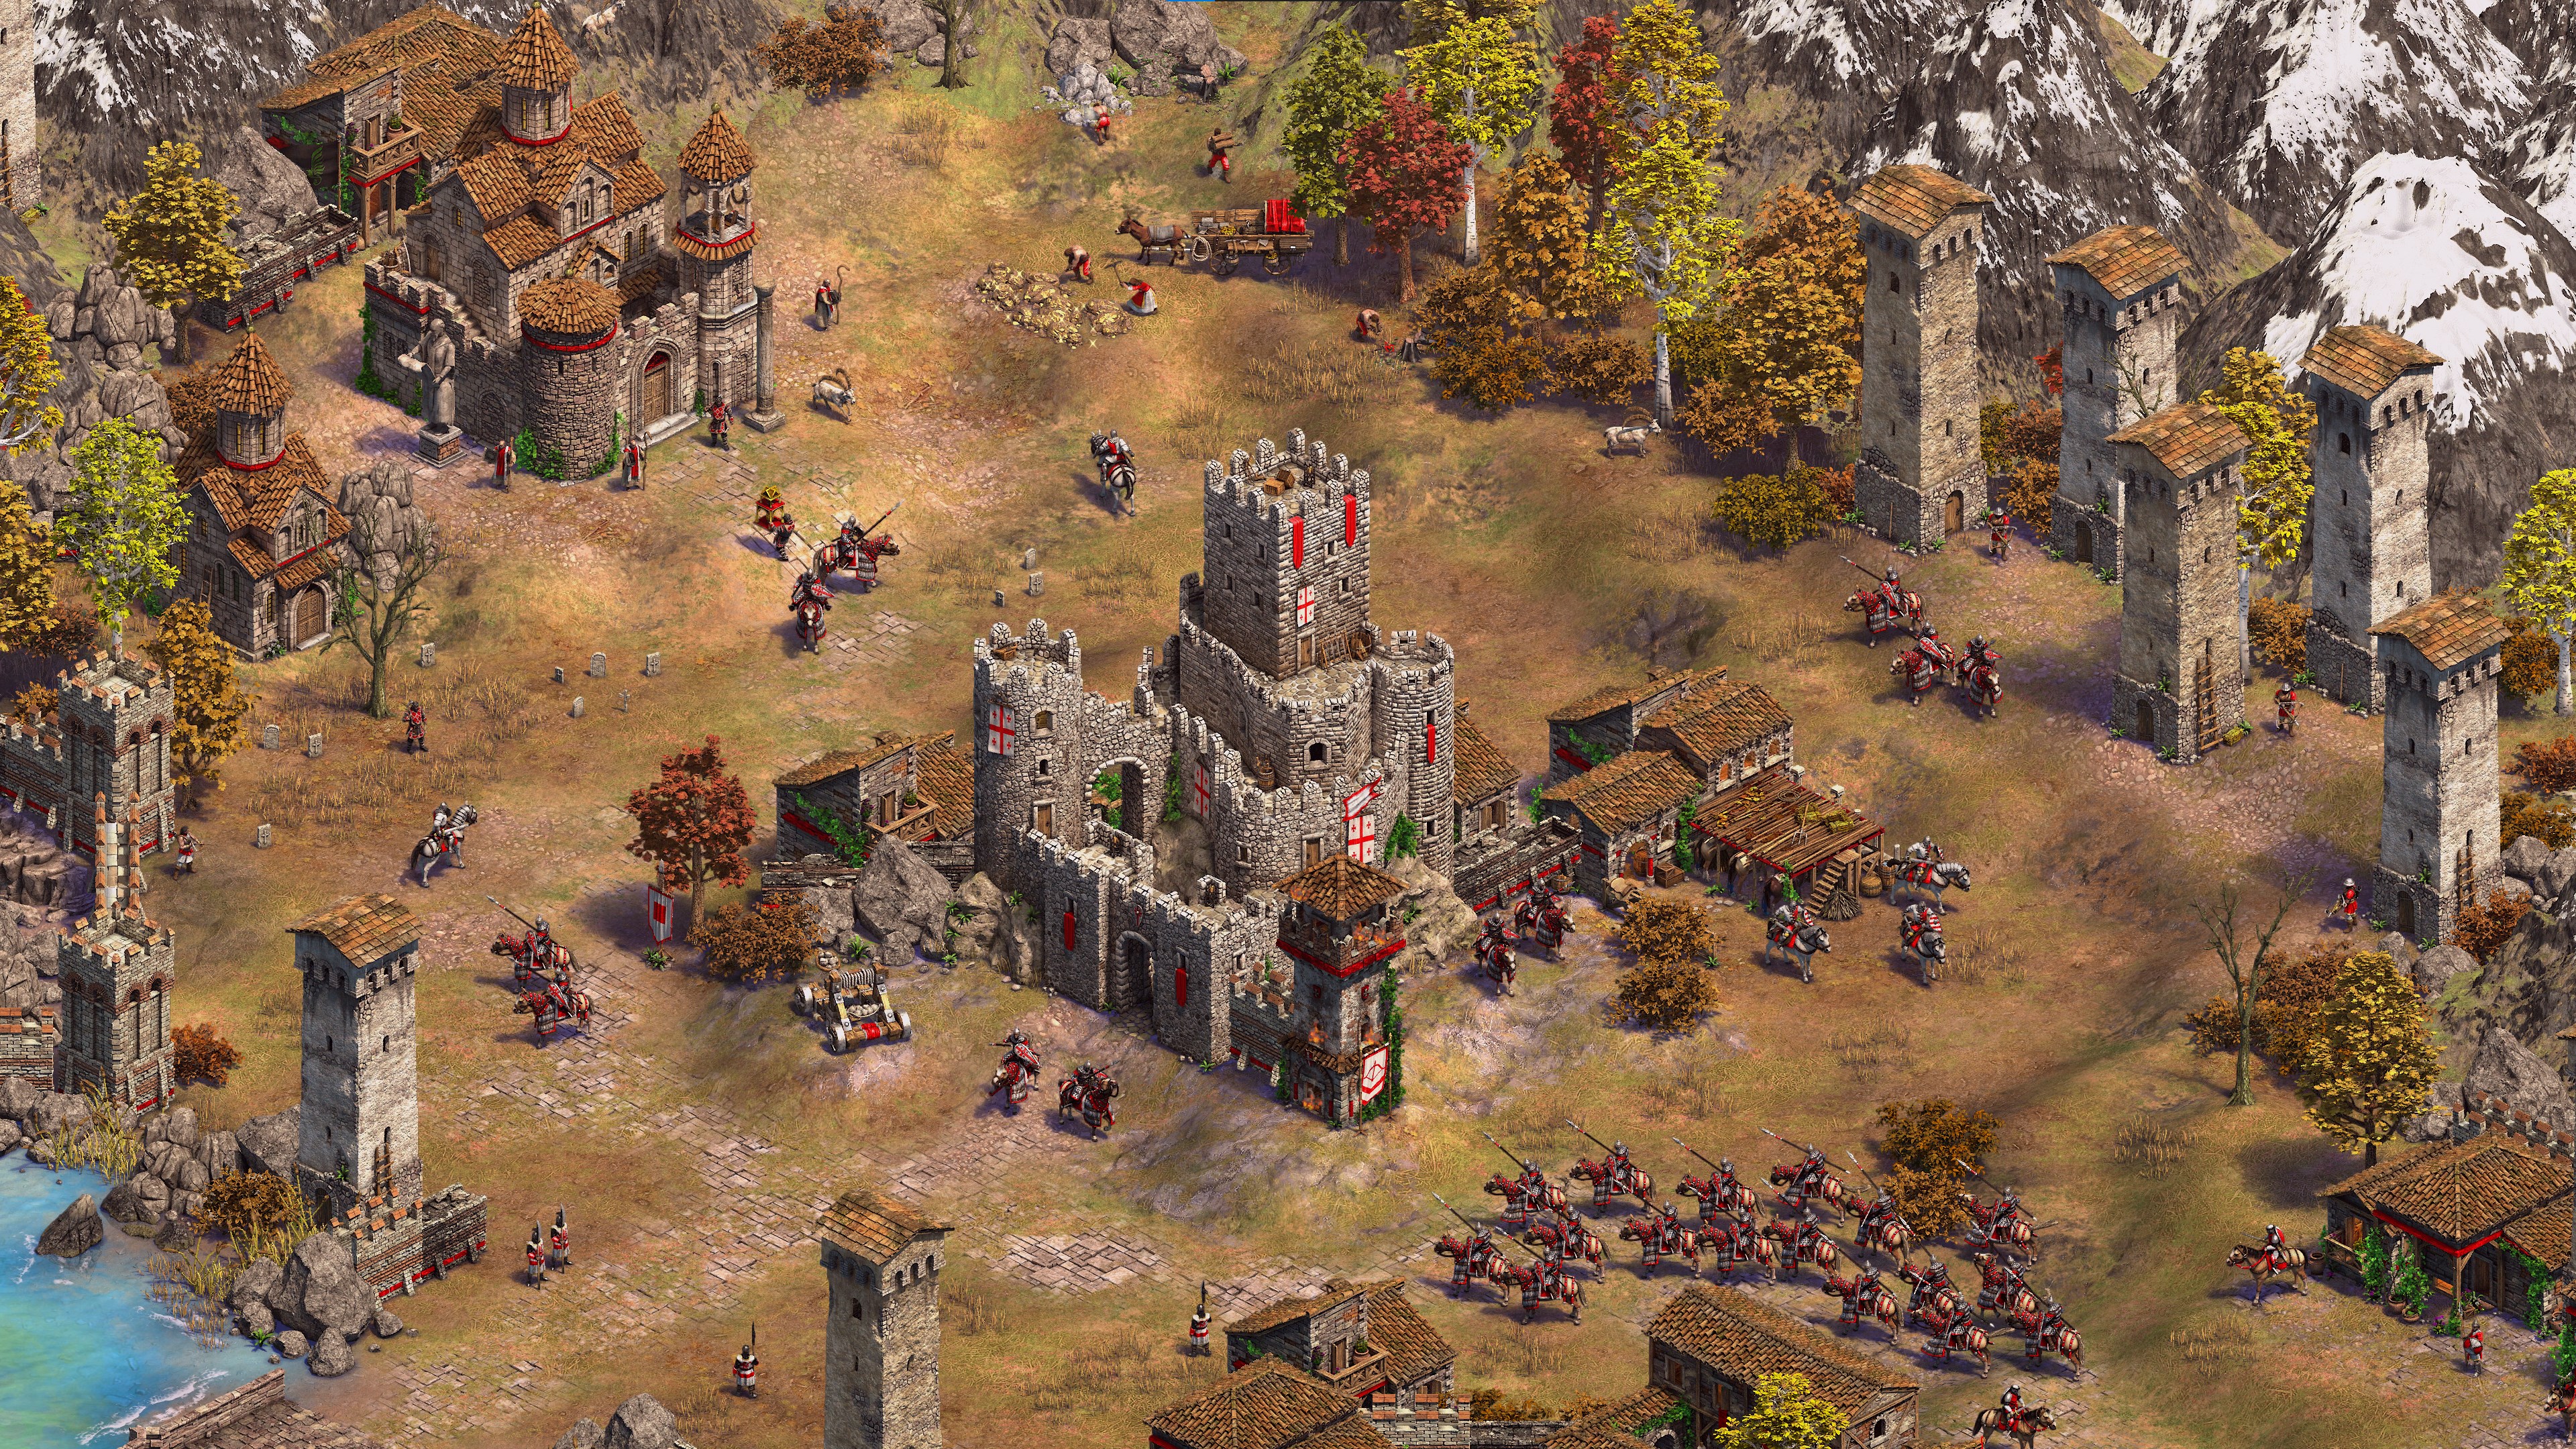 Age of Empires II: Definitive Edition - The Mountain Royals screenshot 66388